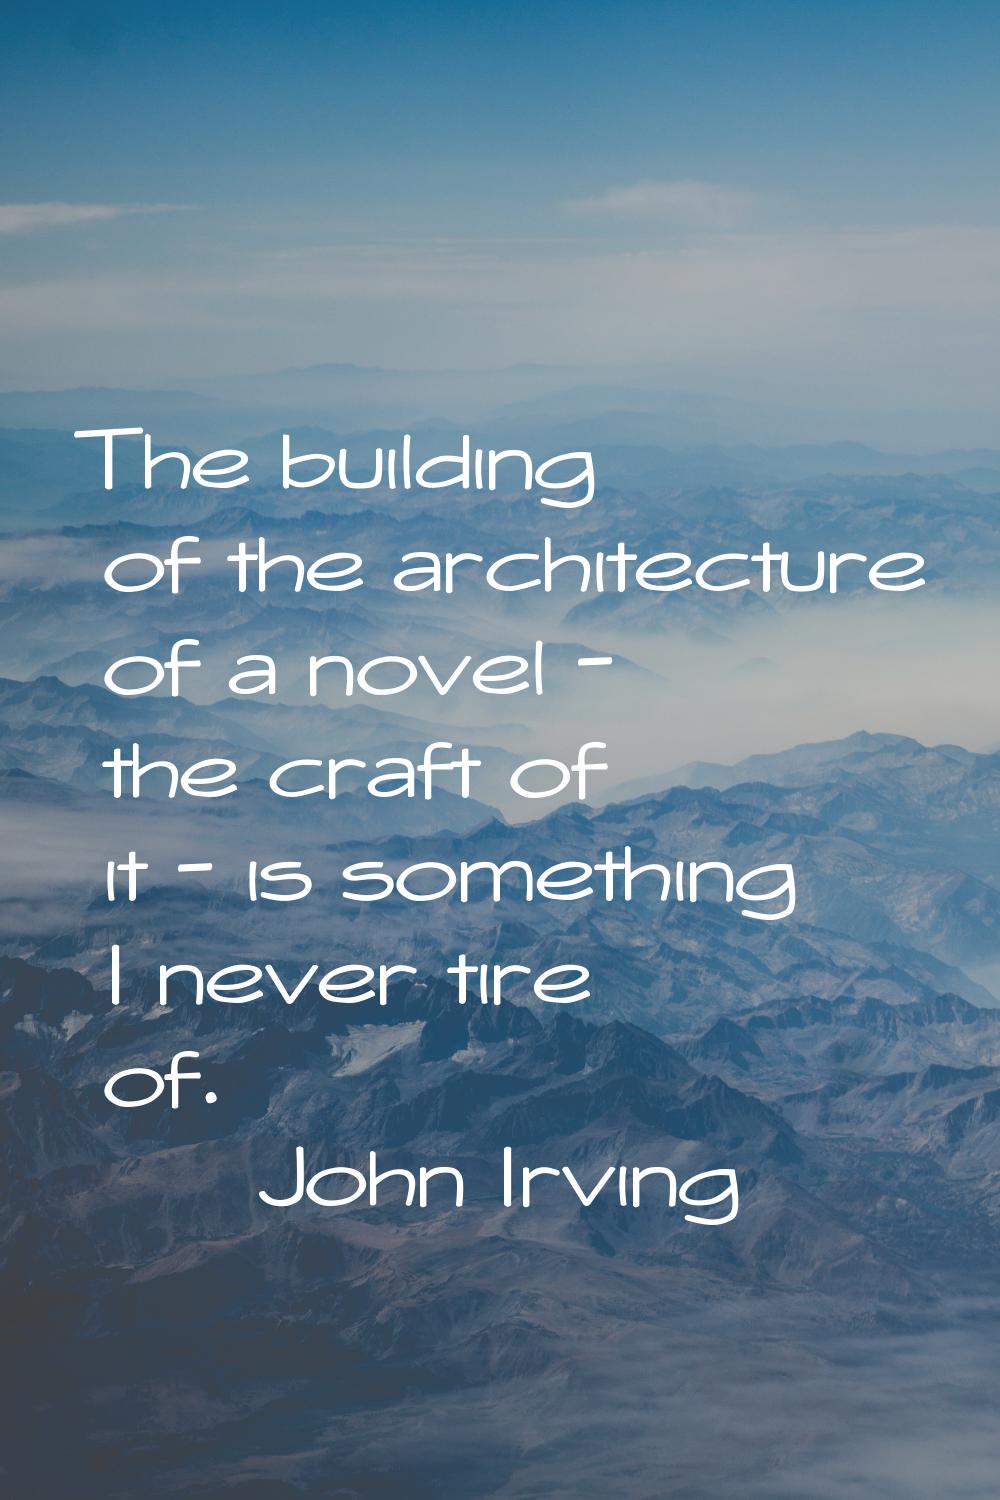 The building of the architecture of a novel - the craft of it - is something I never tire of.